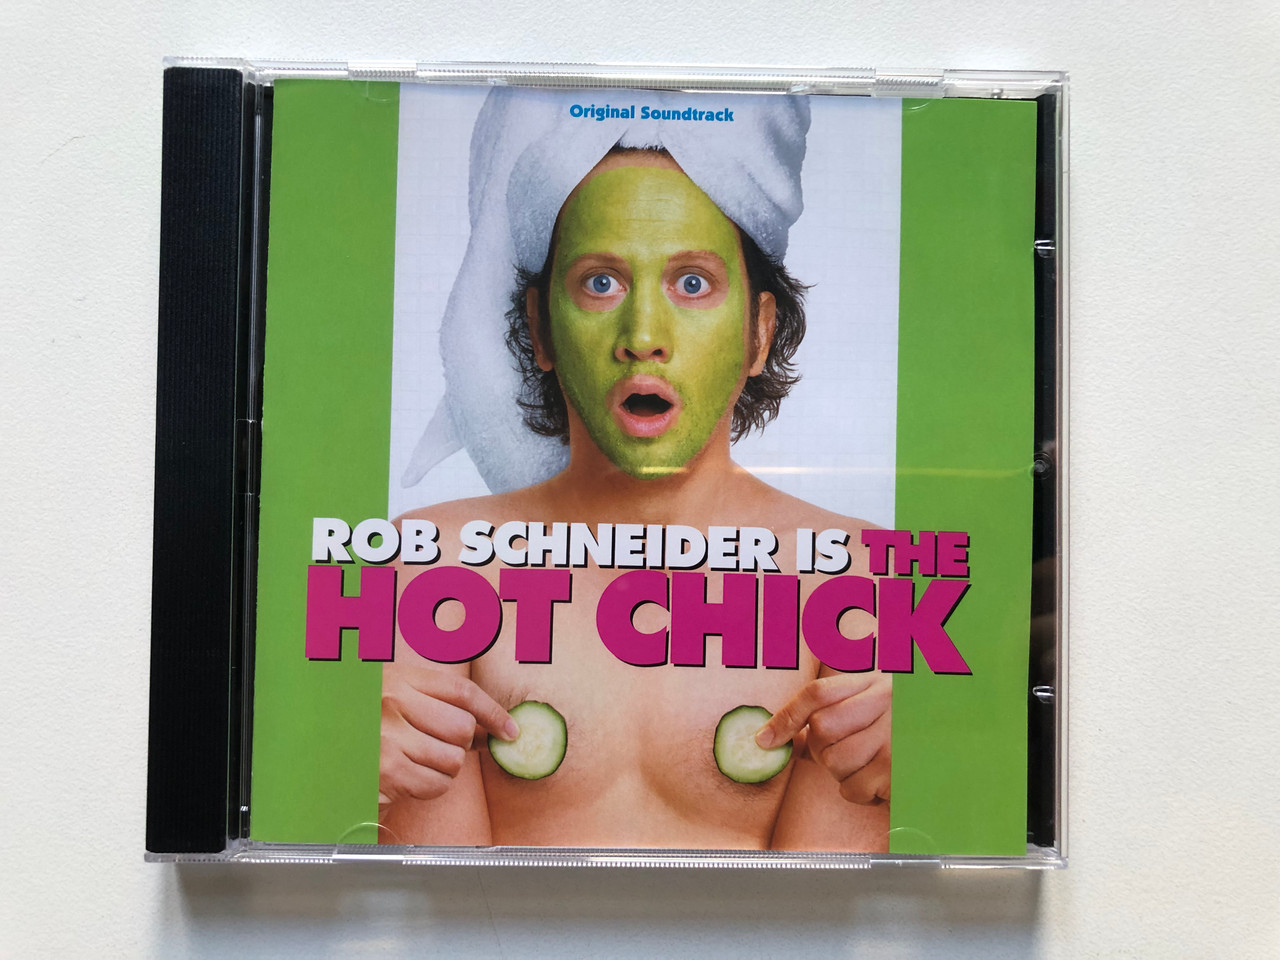 https://cdn10.bigcommerce.com/s-62bdpkt7pb/products/0/images/307502/Rob_Schneider_Is_The_Hot_Chick_Original_Soundtrack_Hollywood_Records_Audio_CD_2002_5050466-5816-2-4_1__95620.1698729480.1280.1280.JPG?c=2